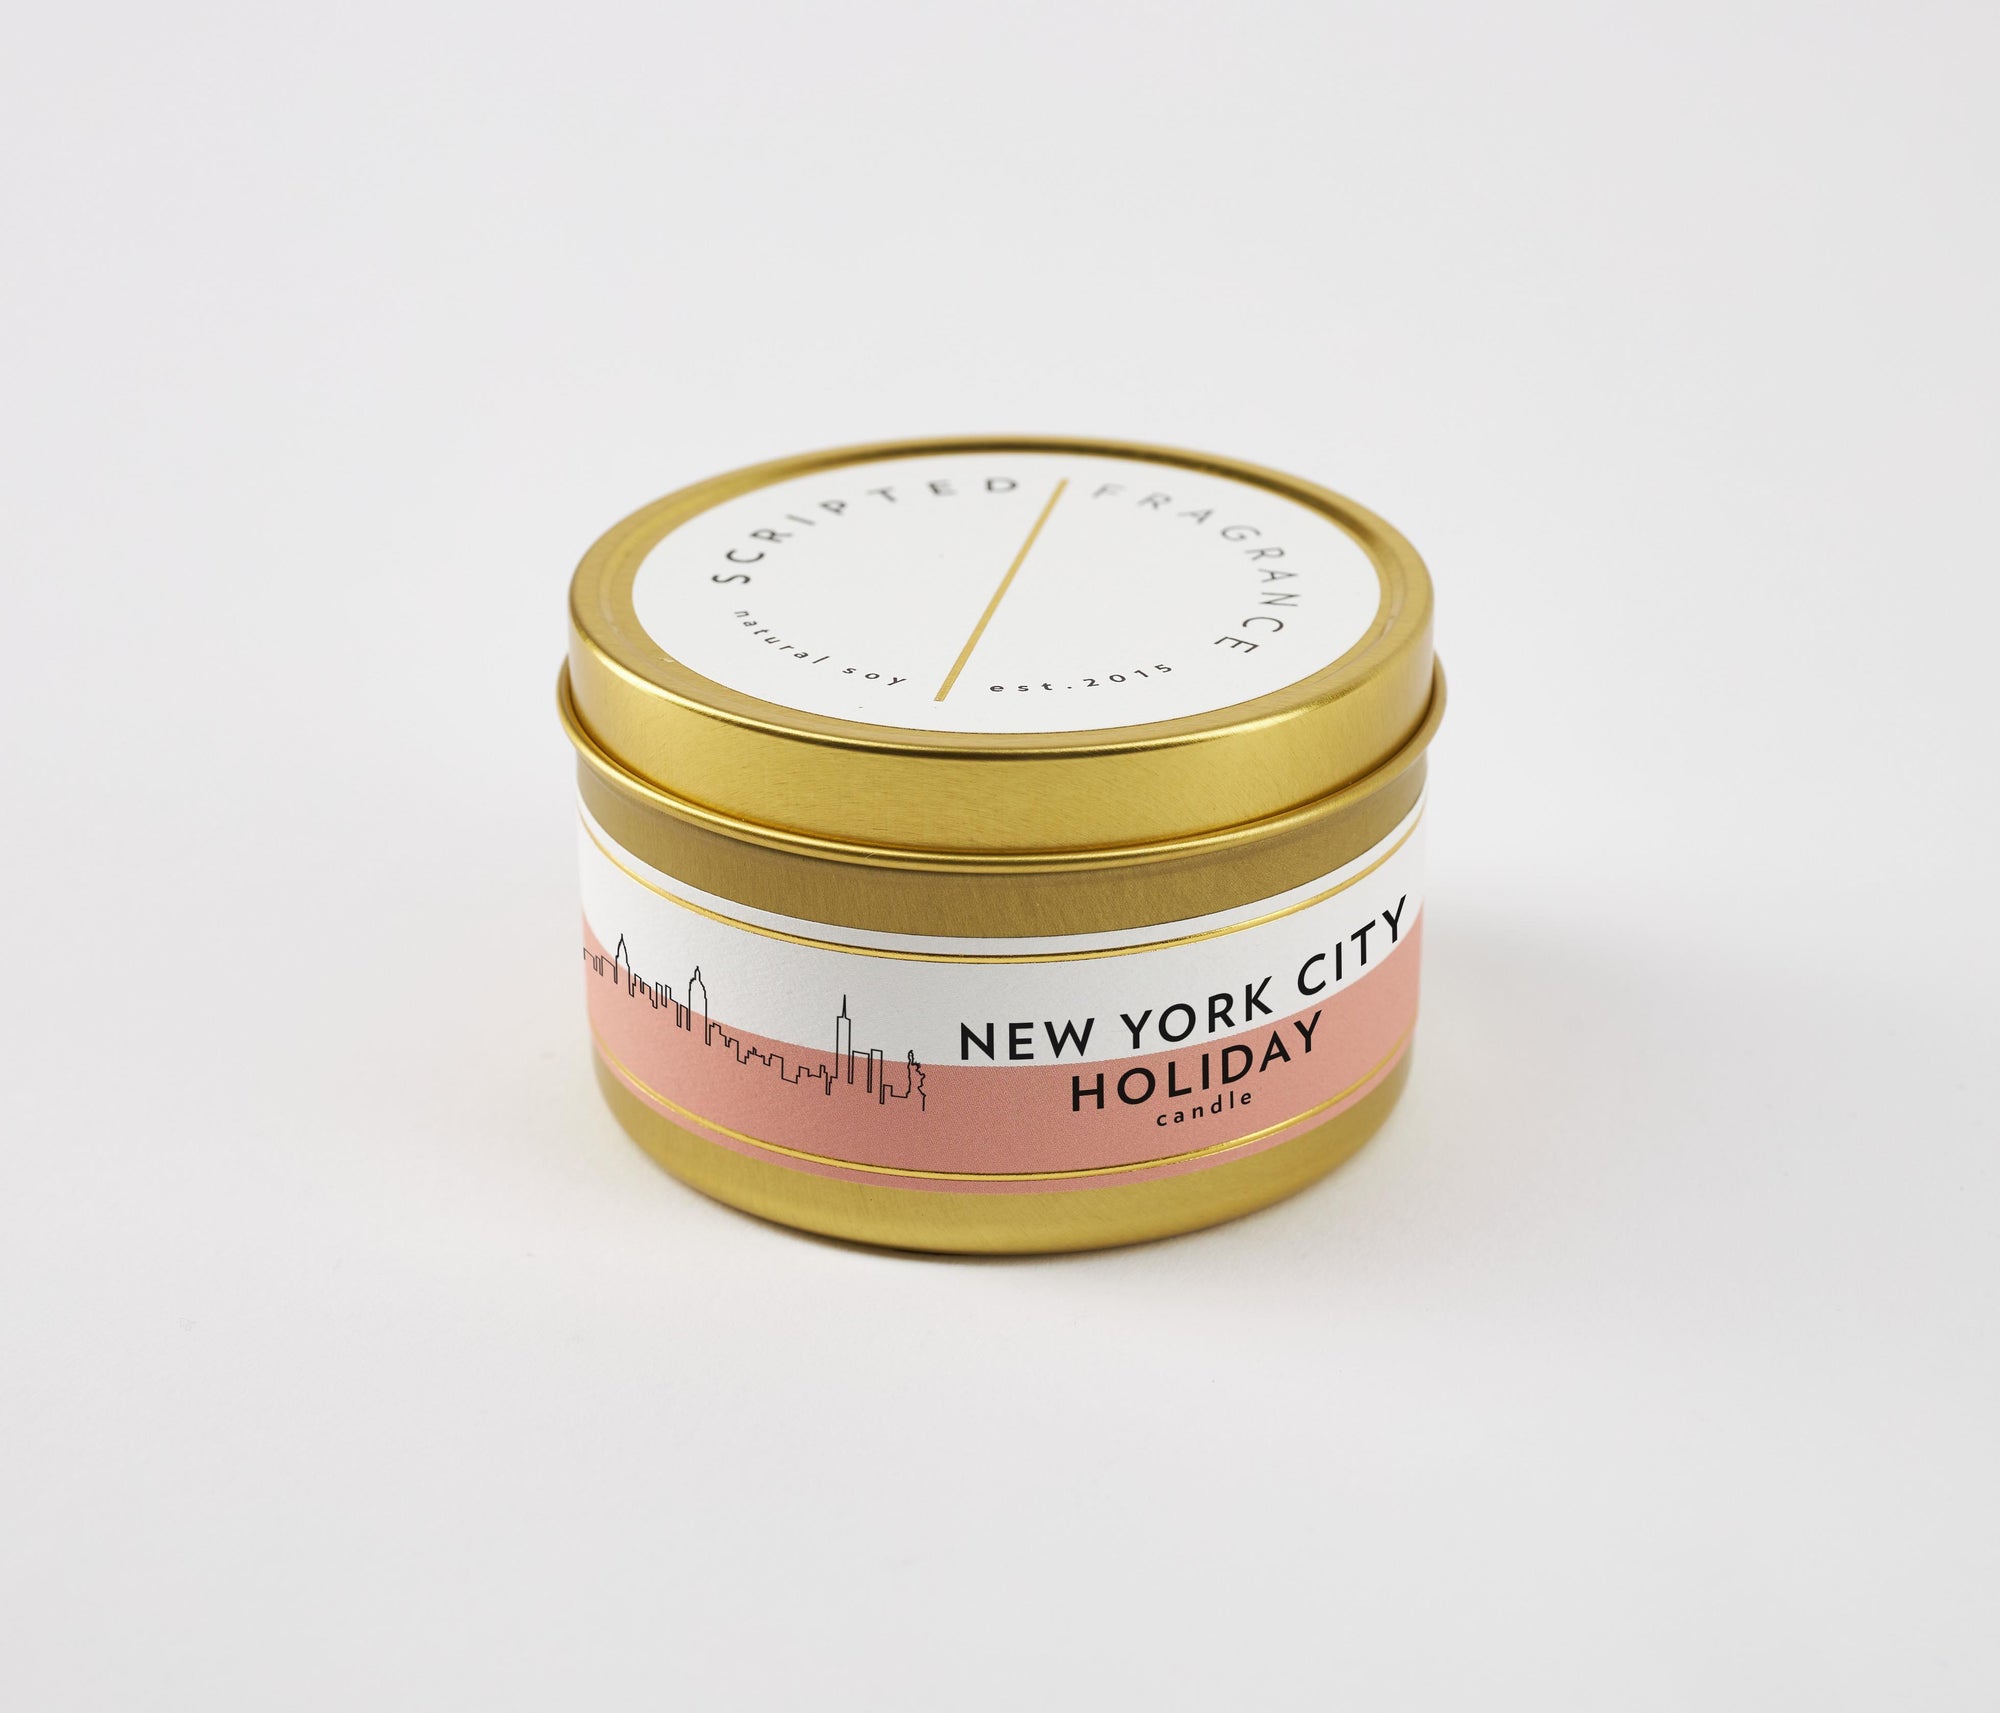 New York City Holiday Soy Candle